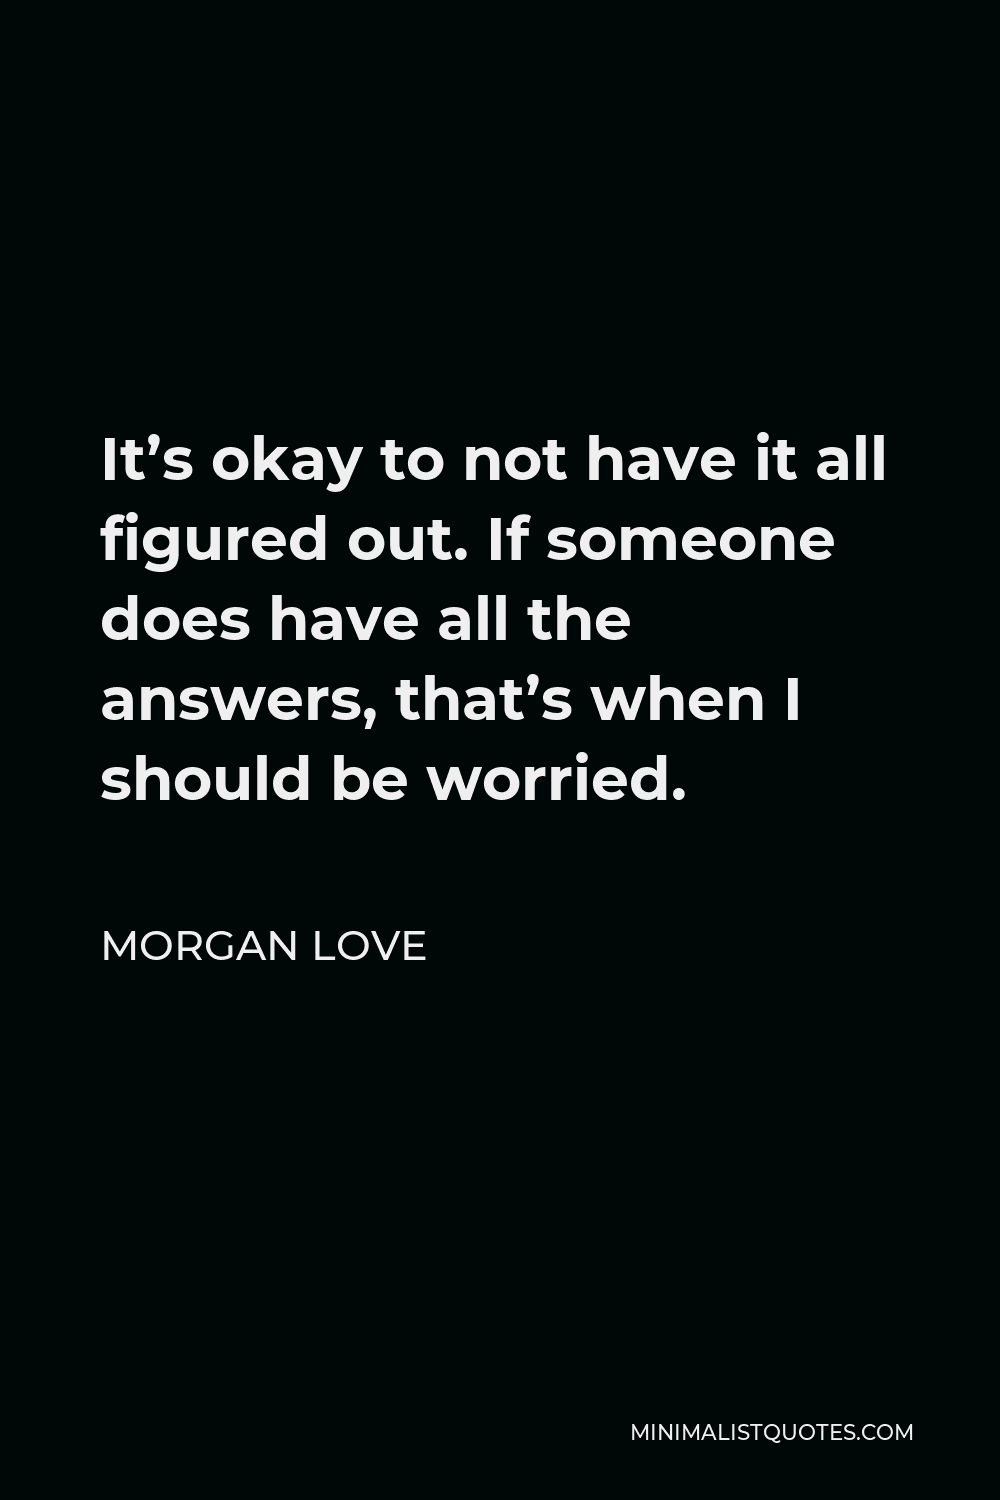 Morgan Love Quote - It’s okay to not have it all figured out. If someone does have all the answers, that’s when I should be worried.